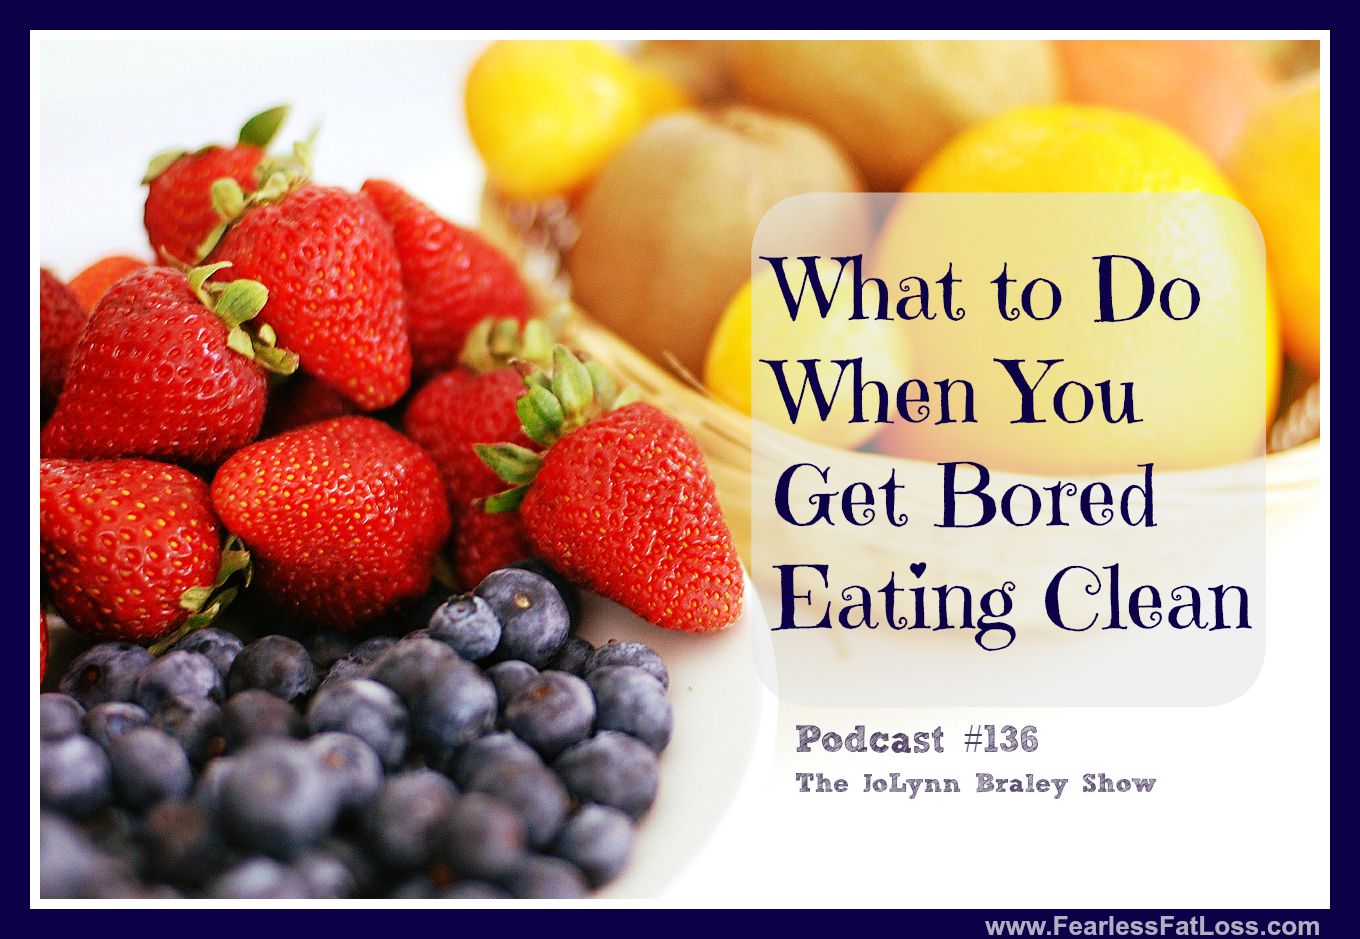 What To Do When You Get Bored Eating Clean [Podcast #136]